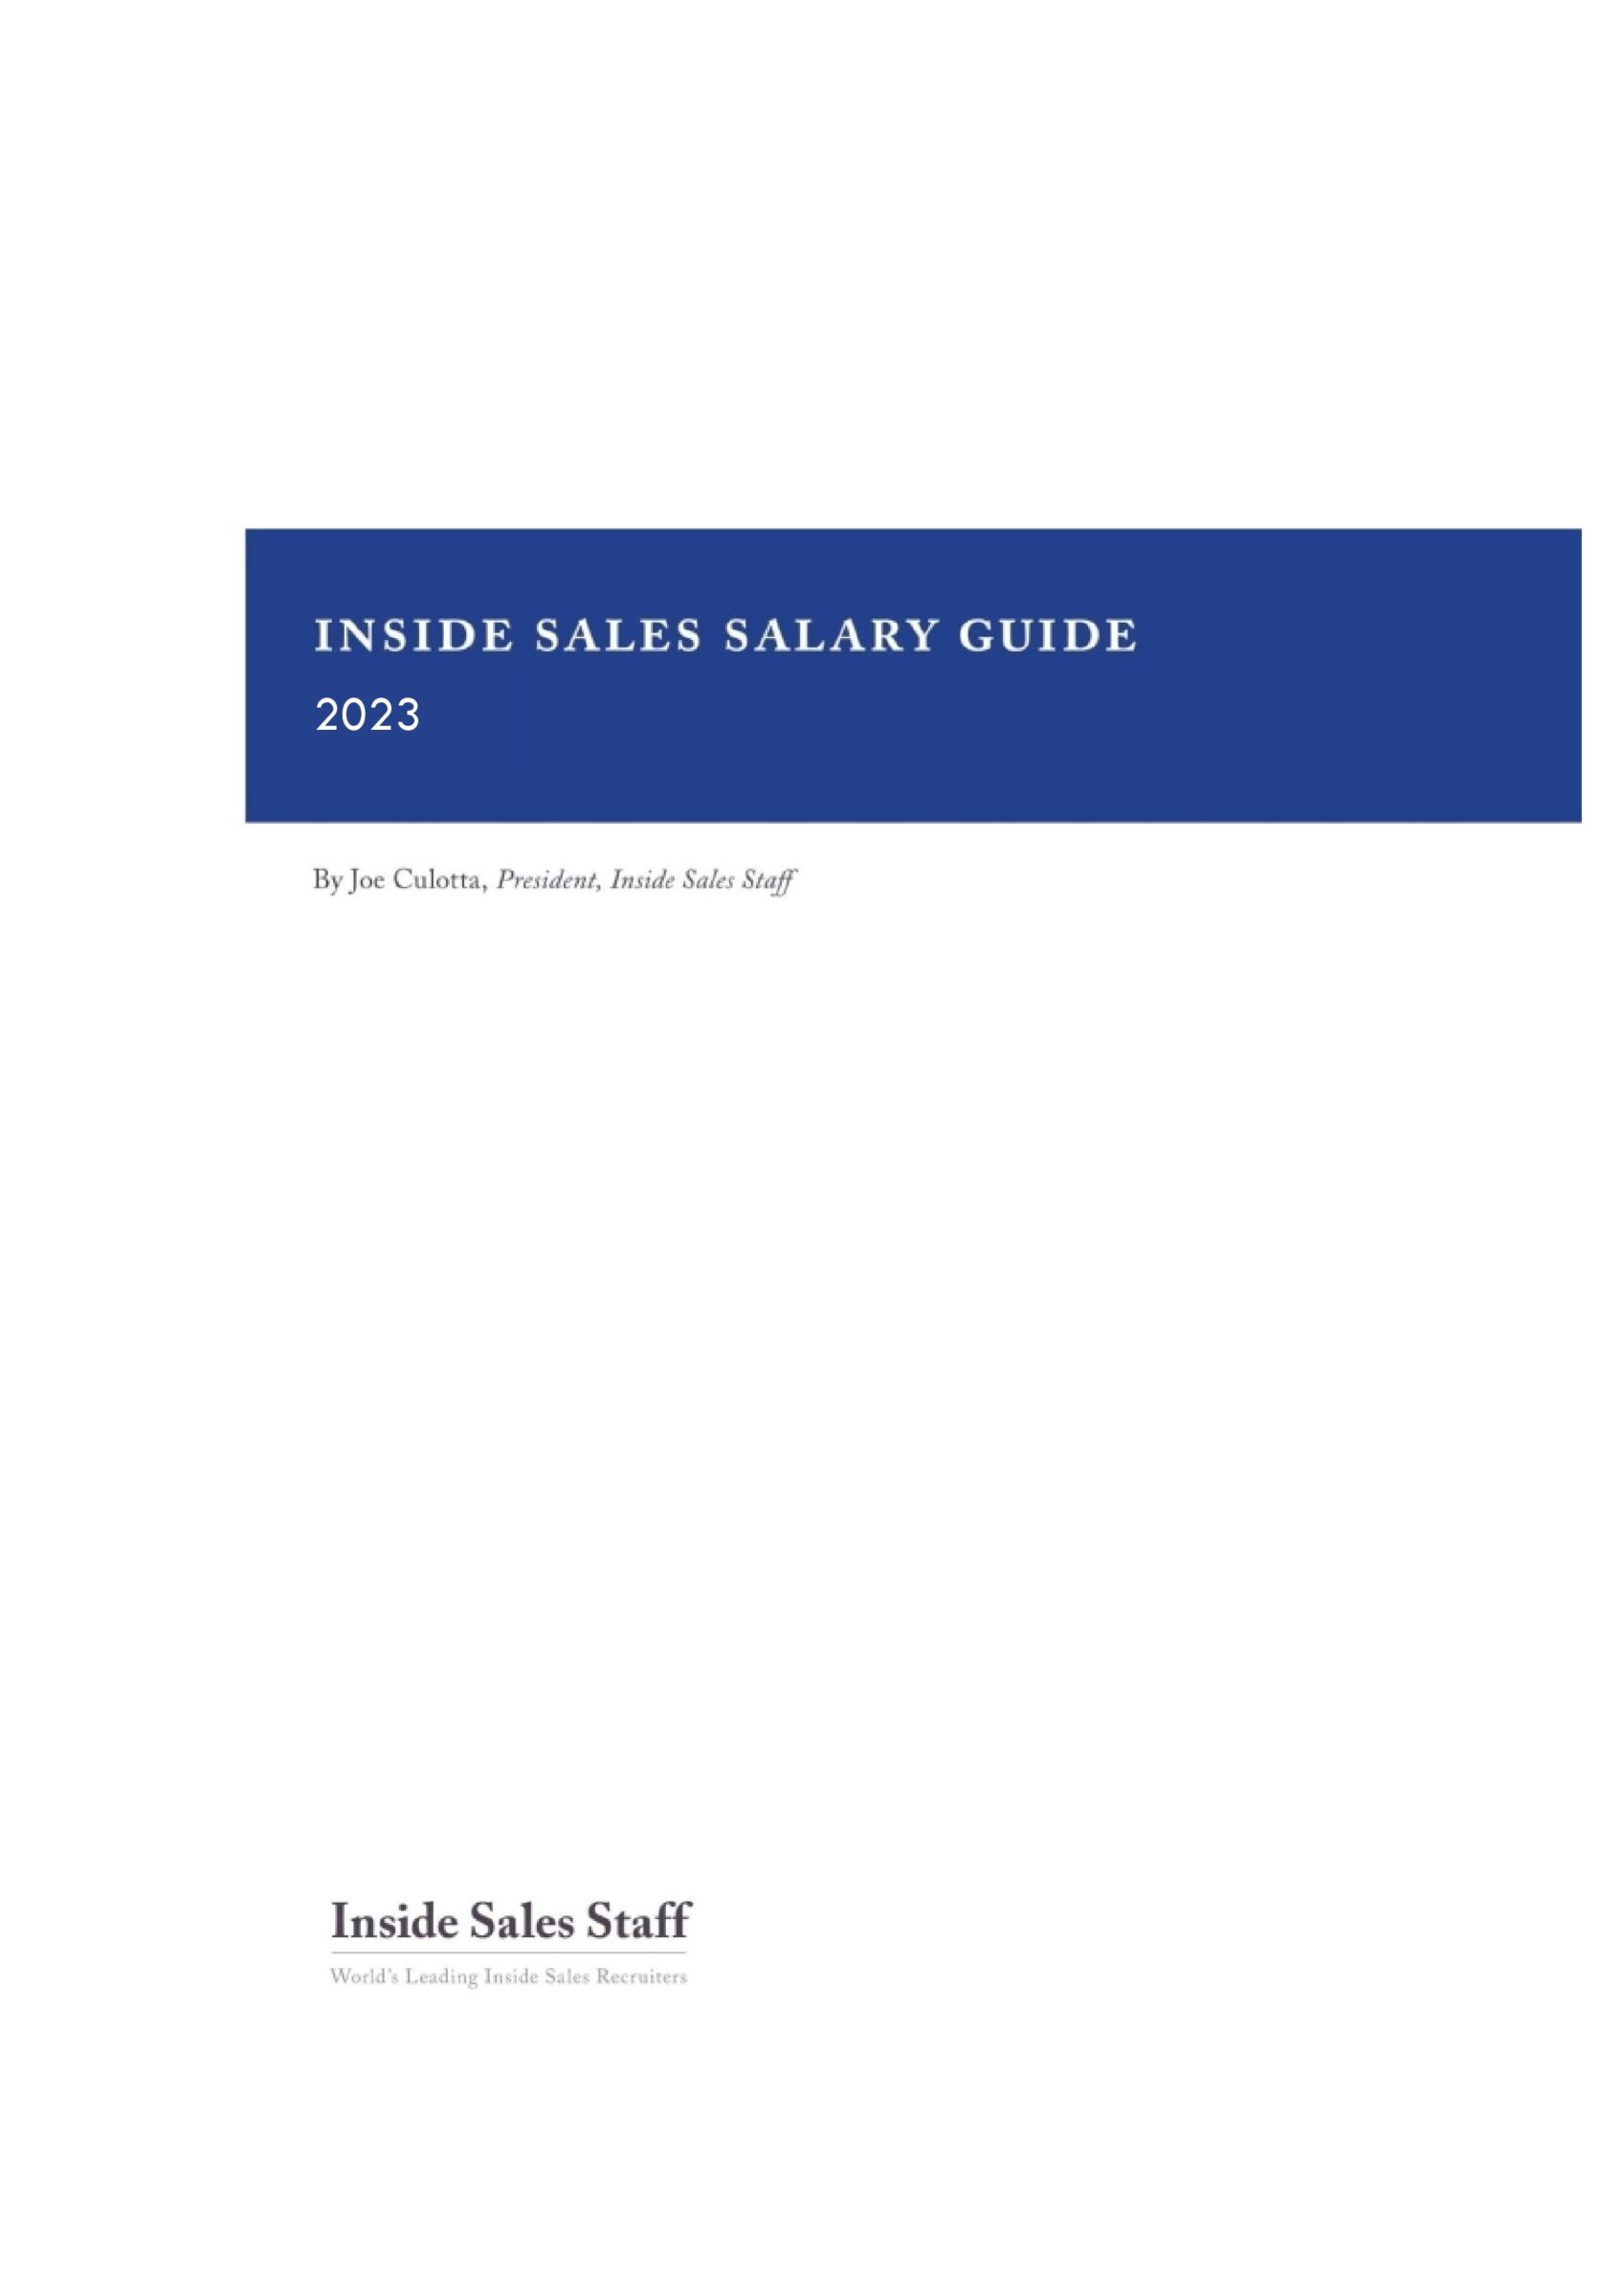 2023 Inside Sales Salary Guide pic